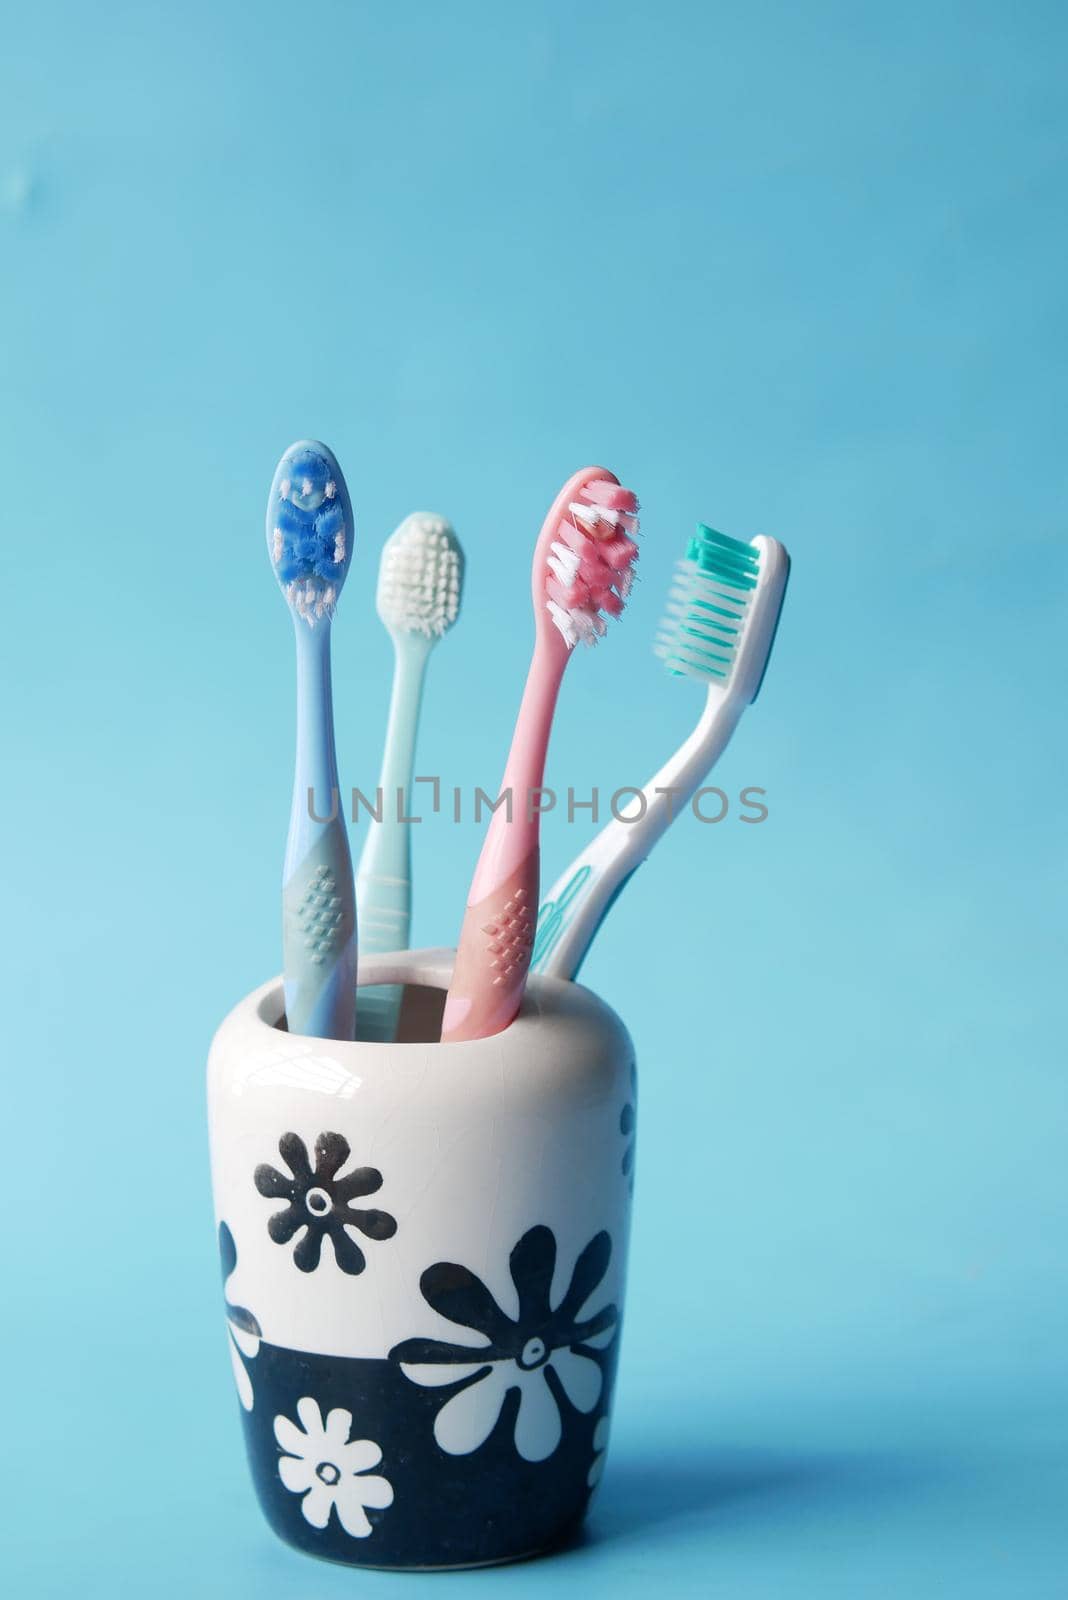 colorful toothbrushes in white mug against blue background by towfiq007